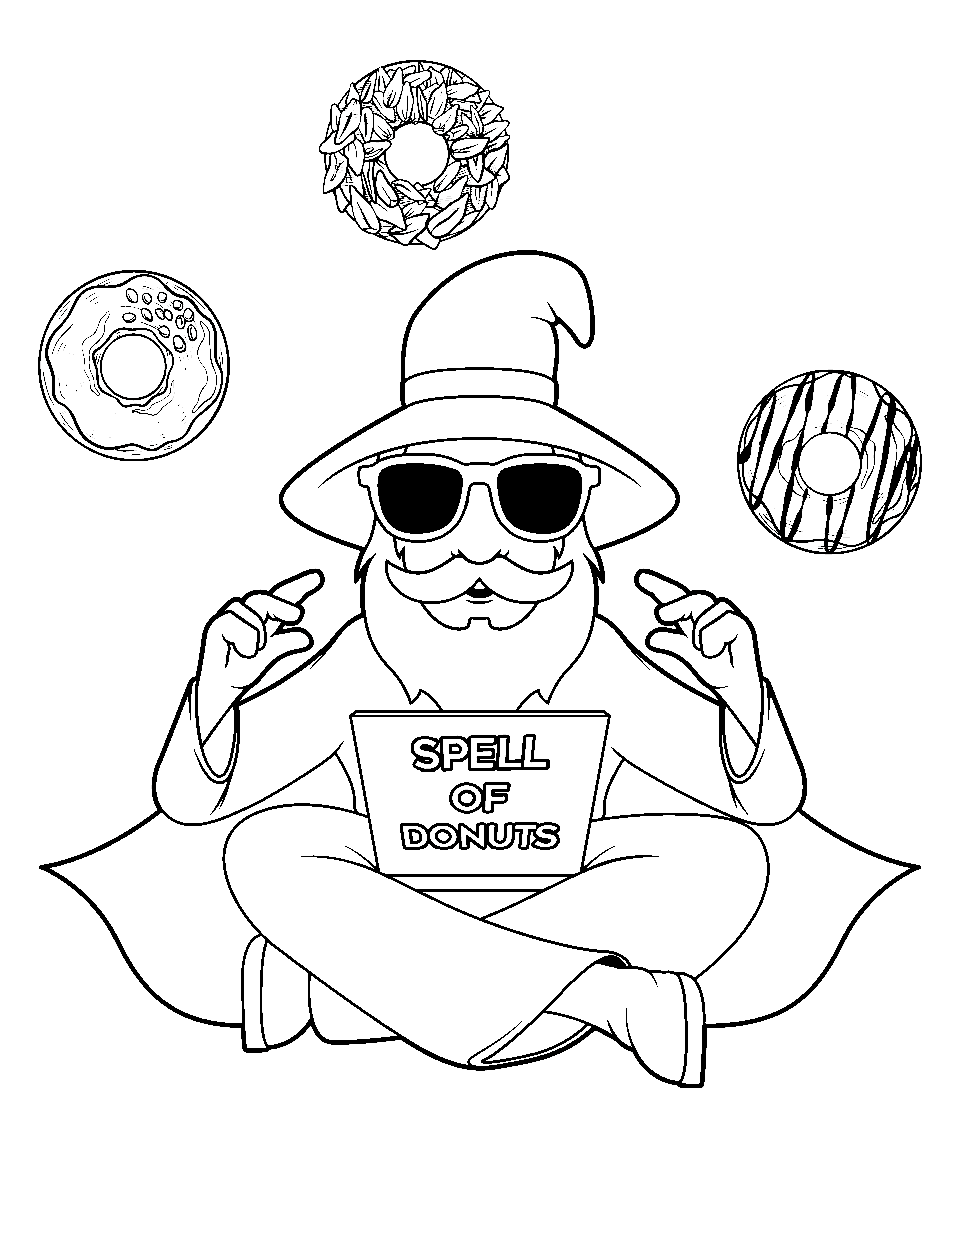 Donut Wizard Coloring Page - A wizard summoning a bunch of donuts with his spell.